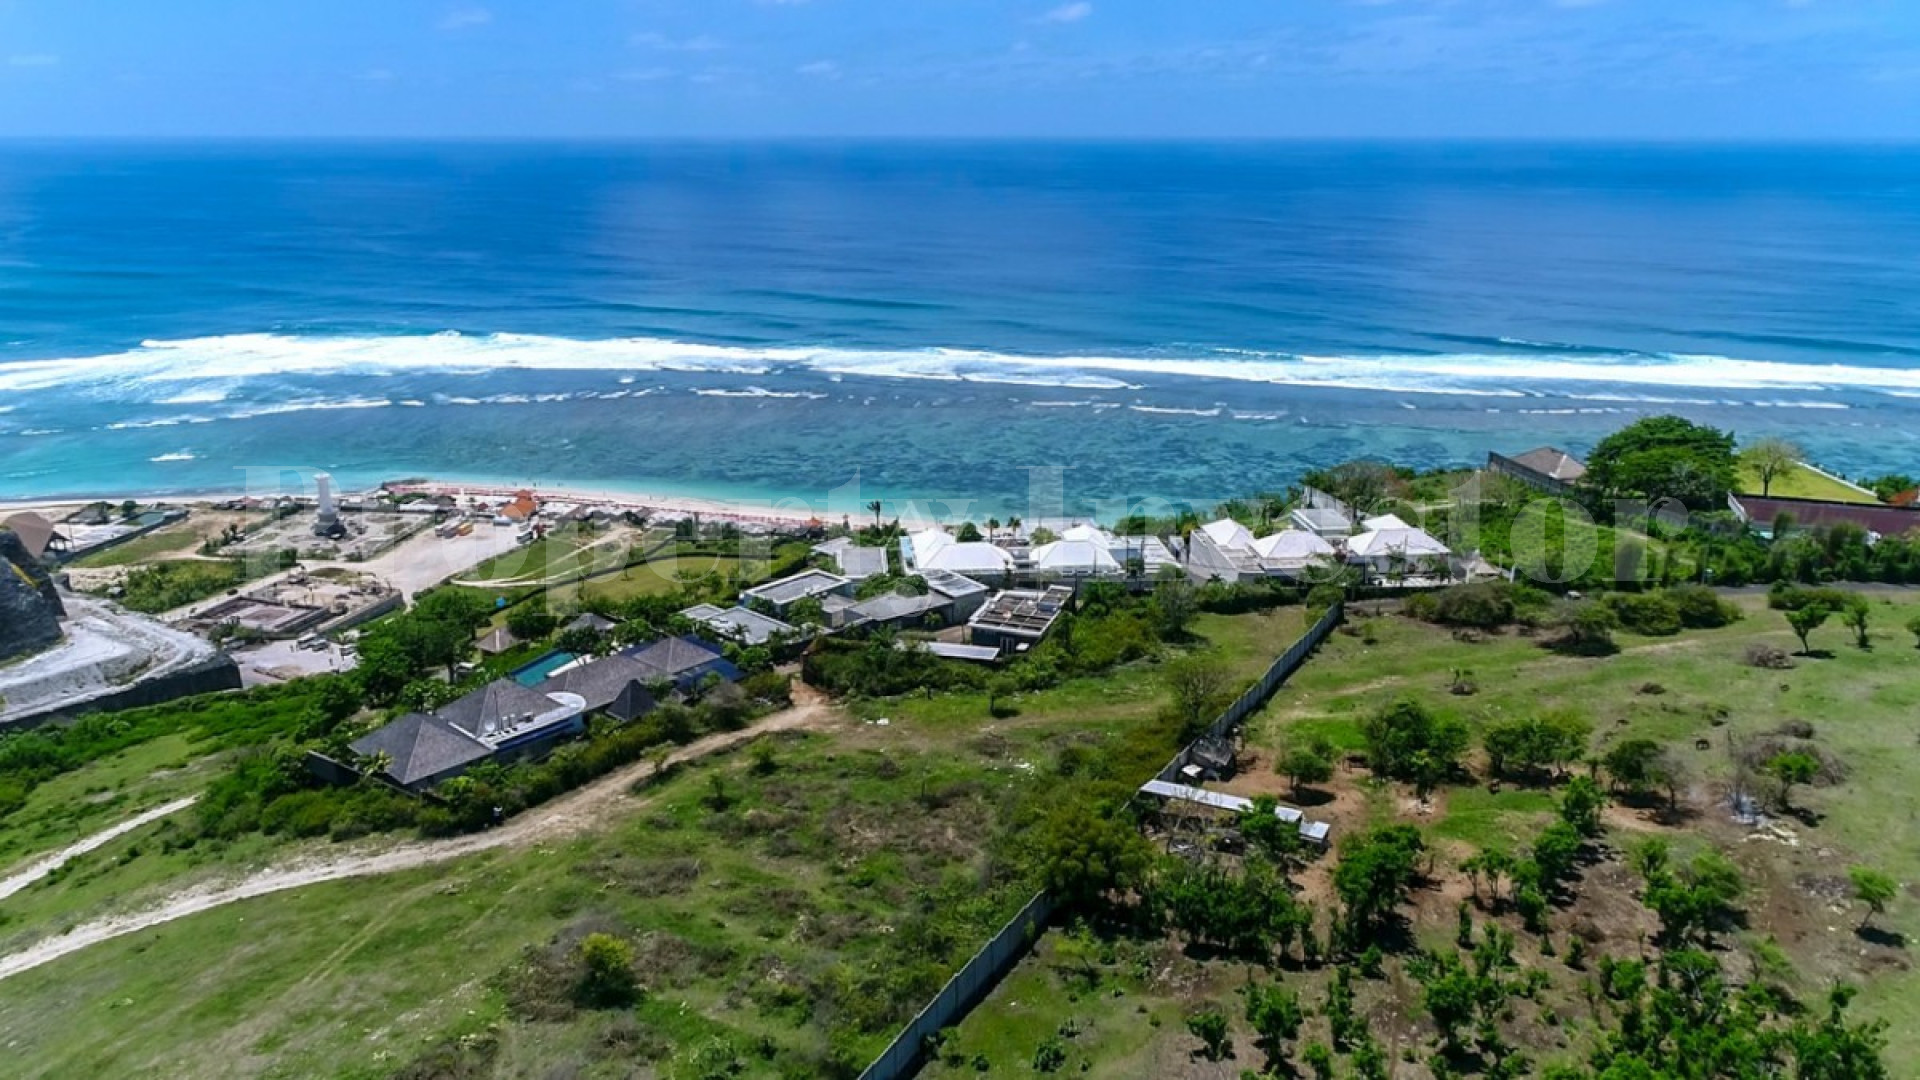 2.65 Hectare Clifftop Lot for Development in Pandawa Beach, South Bali